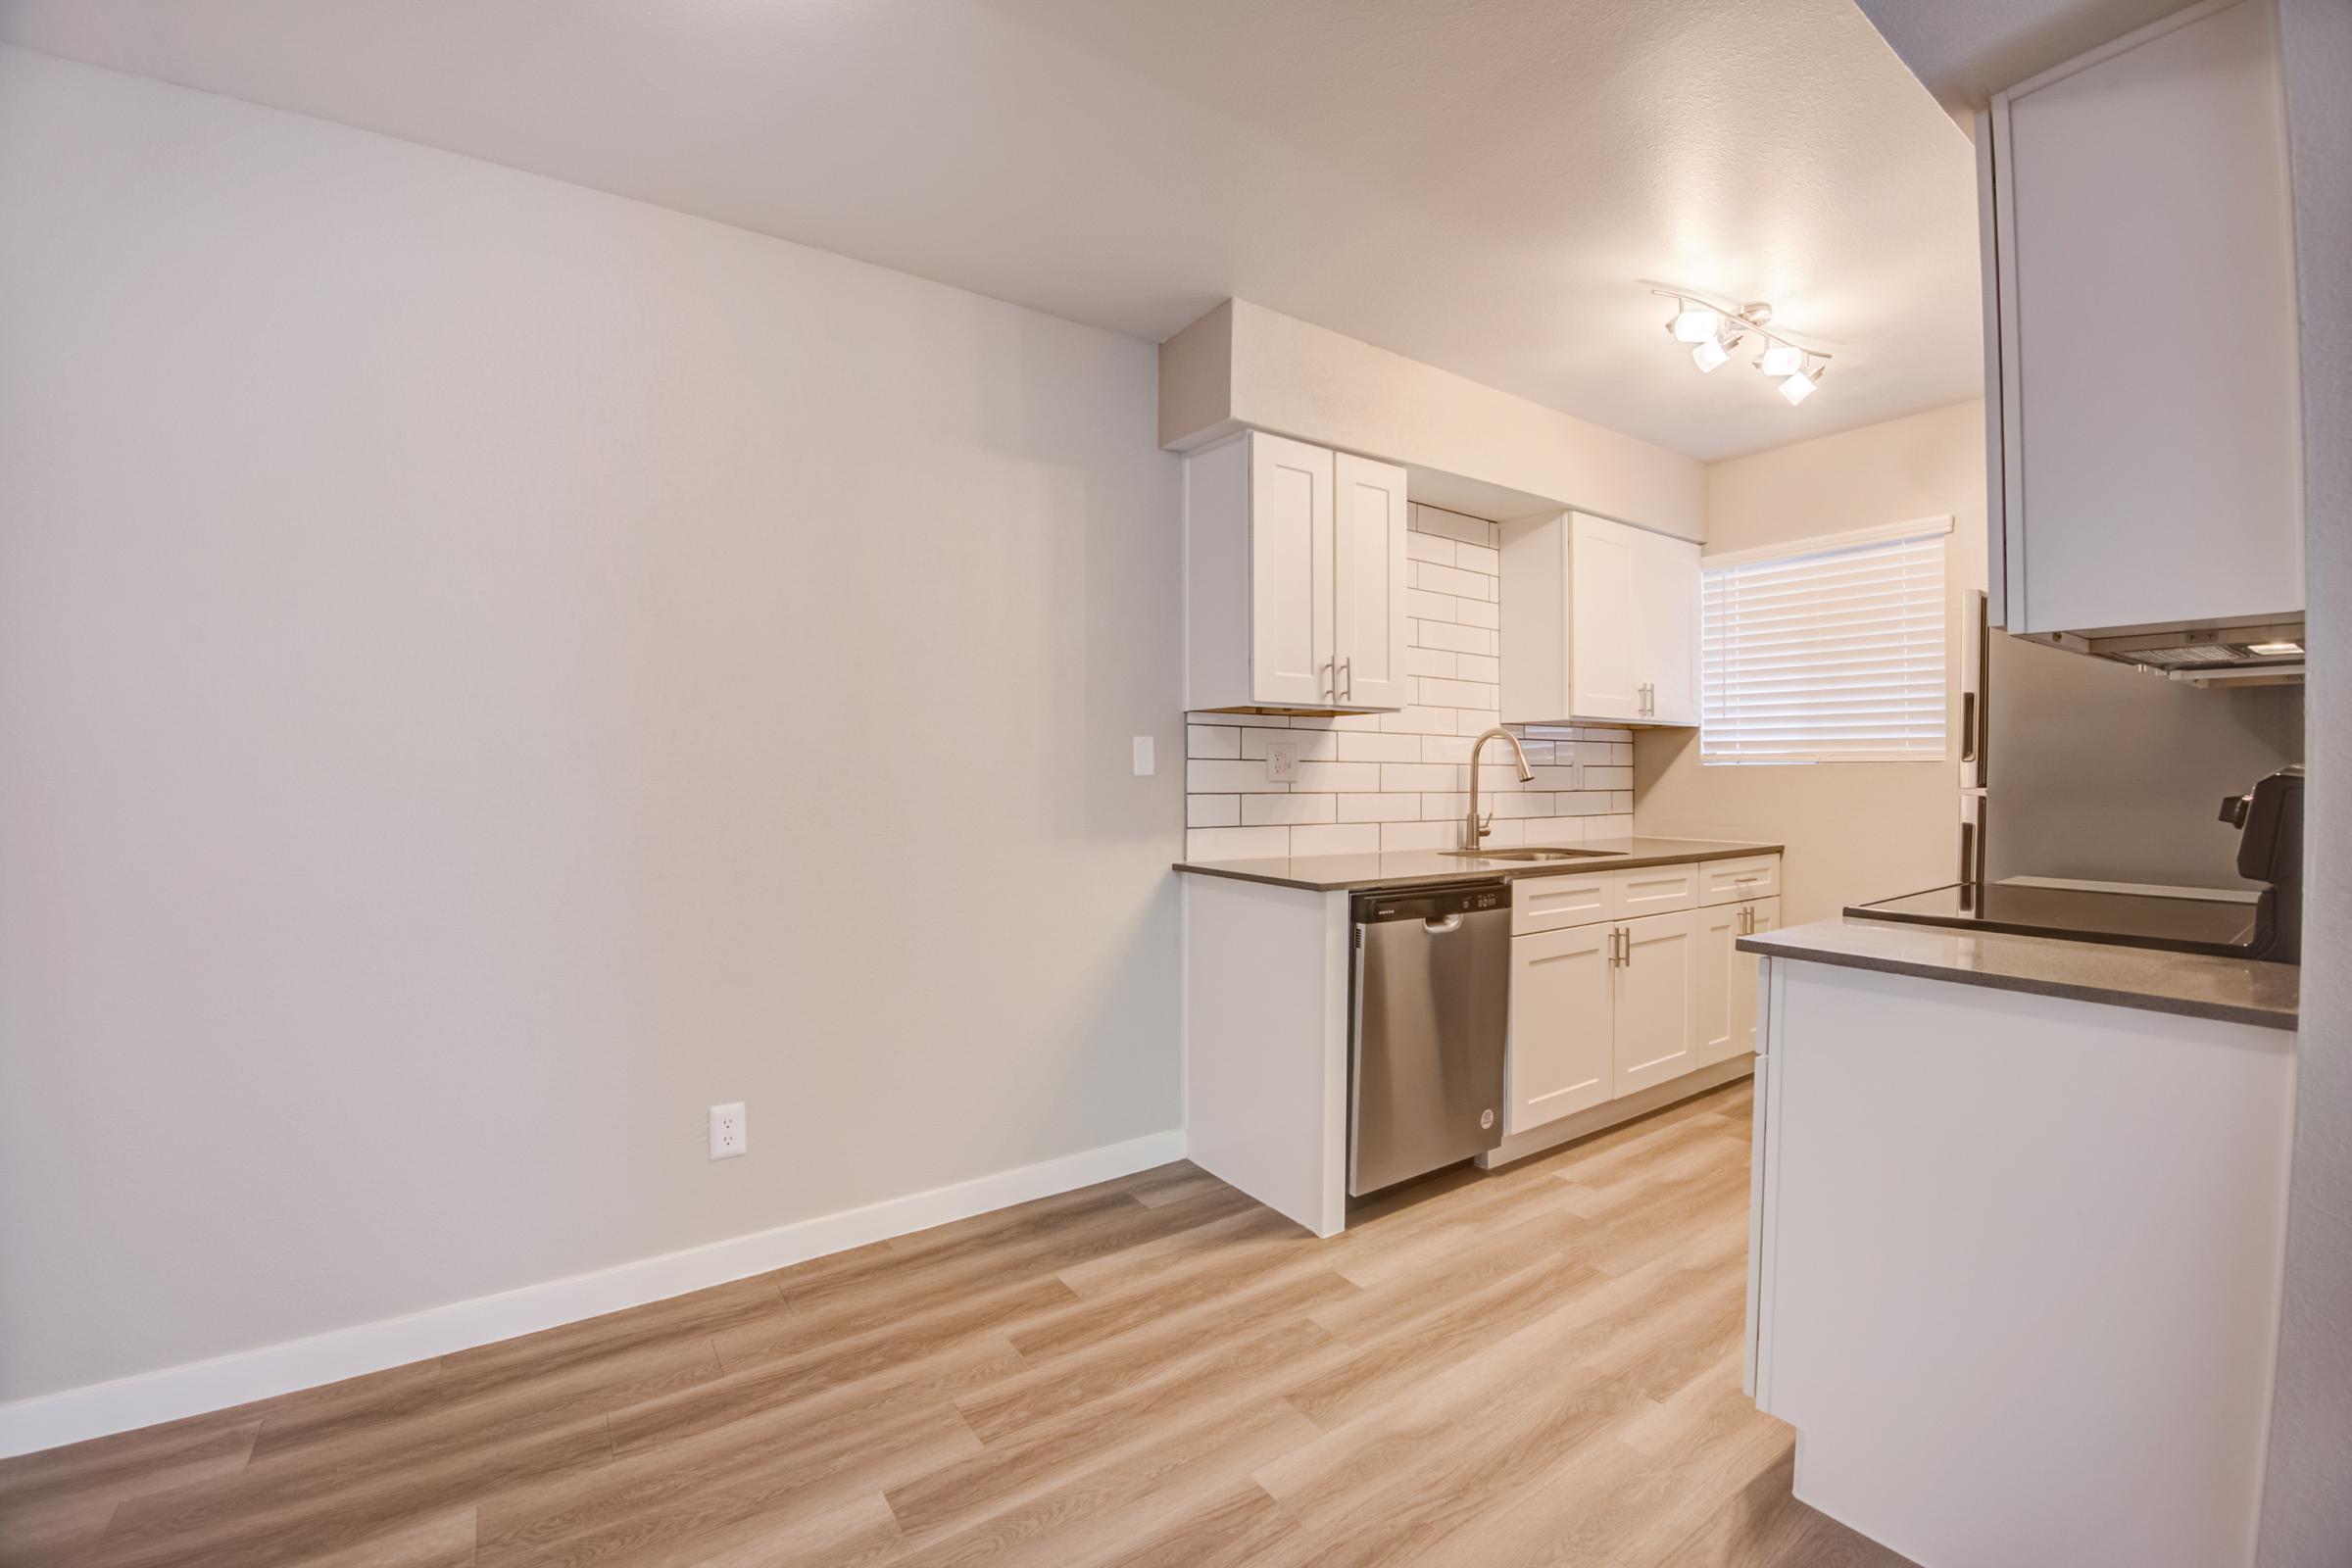 An apartment kitchen at Rise at the Meadows